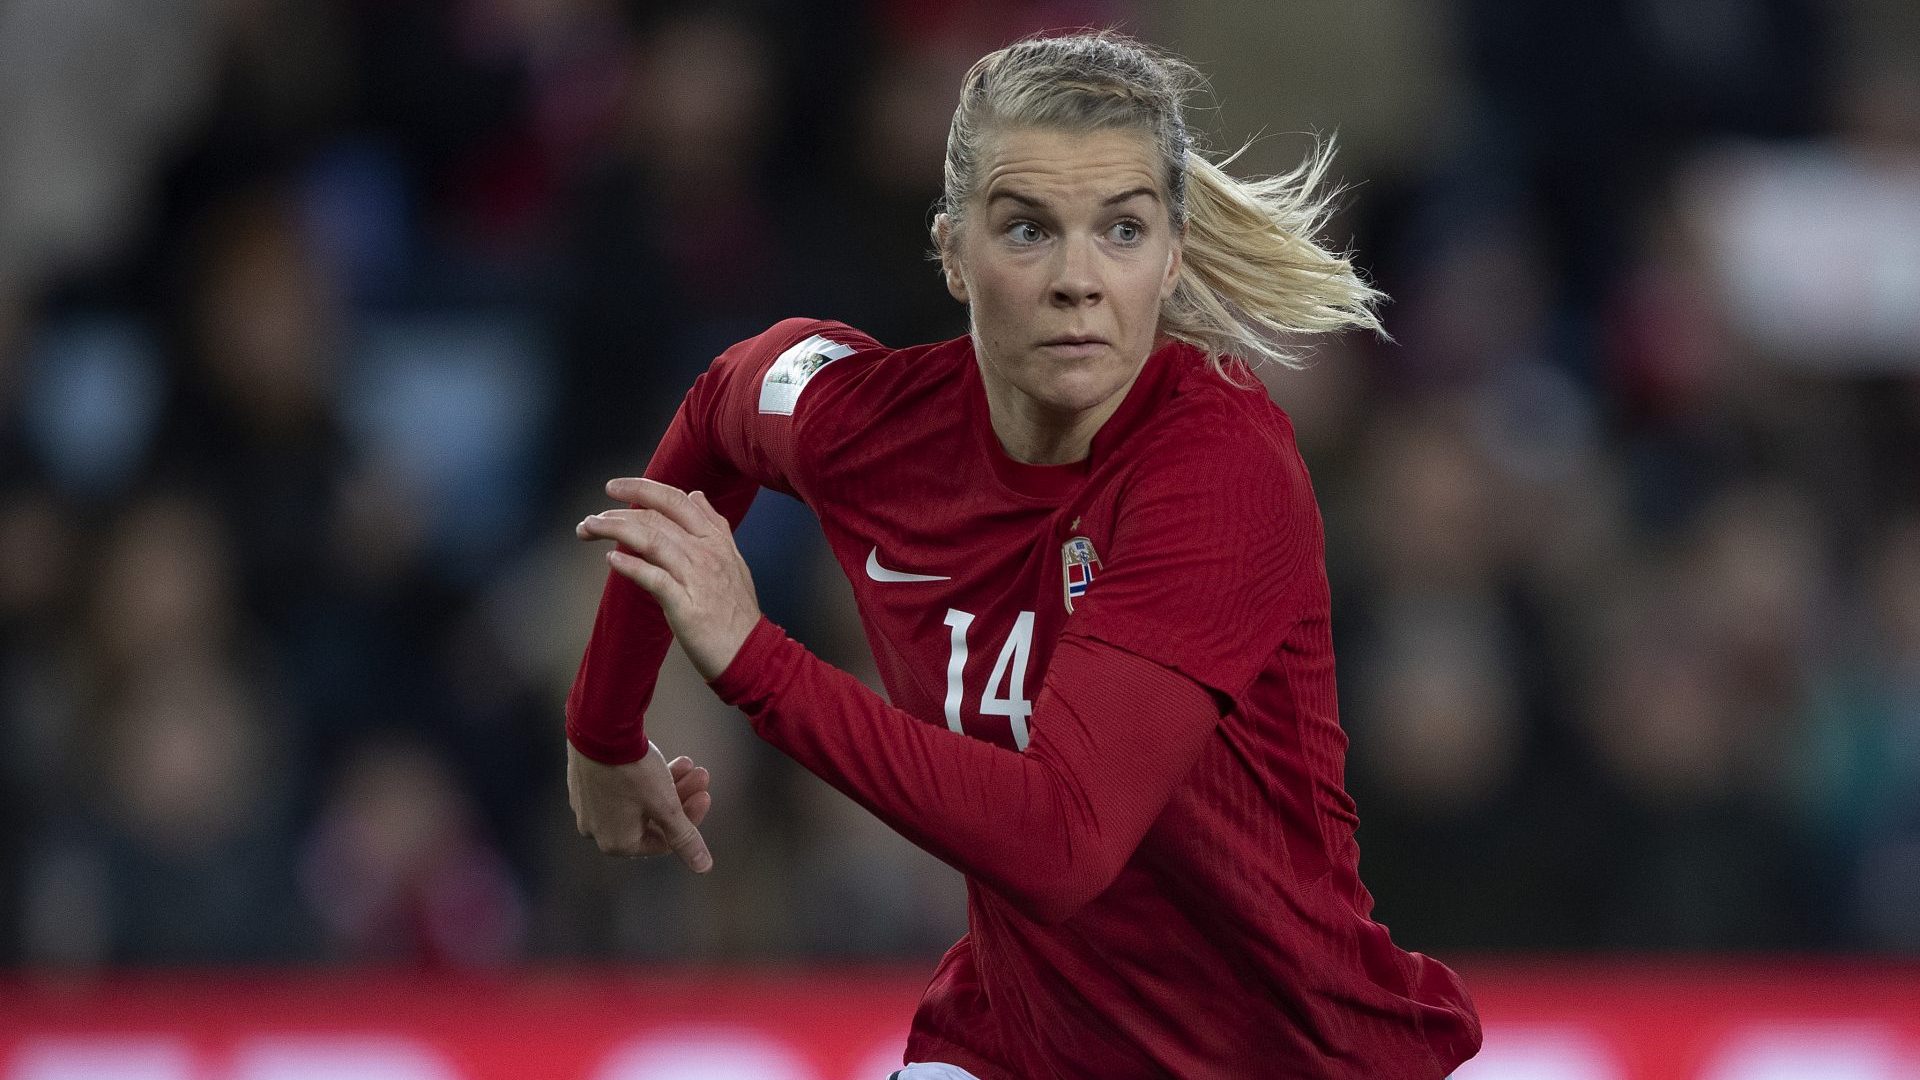 Ada Hegerberg of Norway during the World Cup qualifier against Poland at the Ullevaal stadion in Oslo in April. (Photo by Visionhaus/Getty Images)